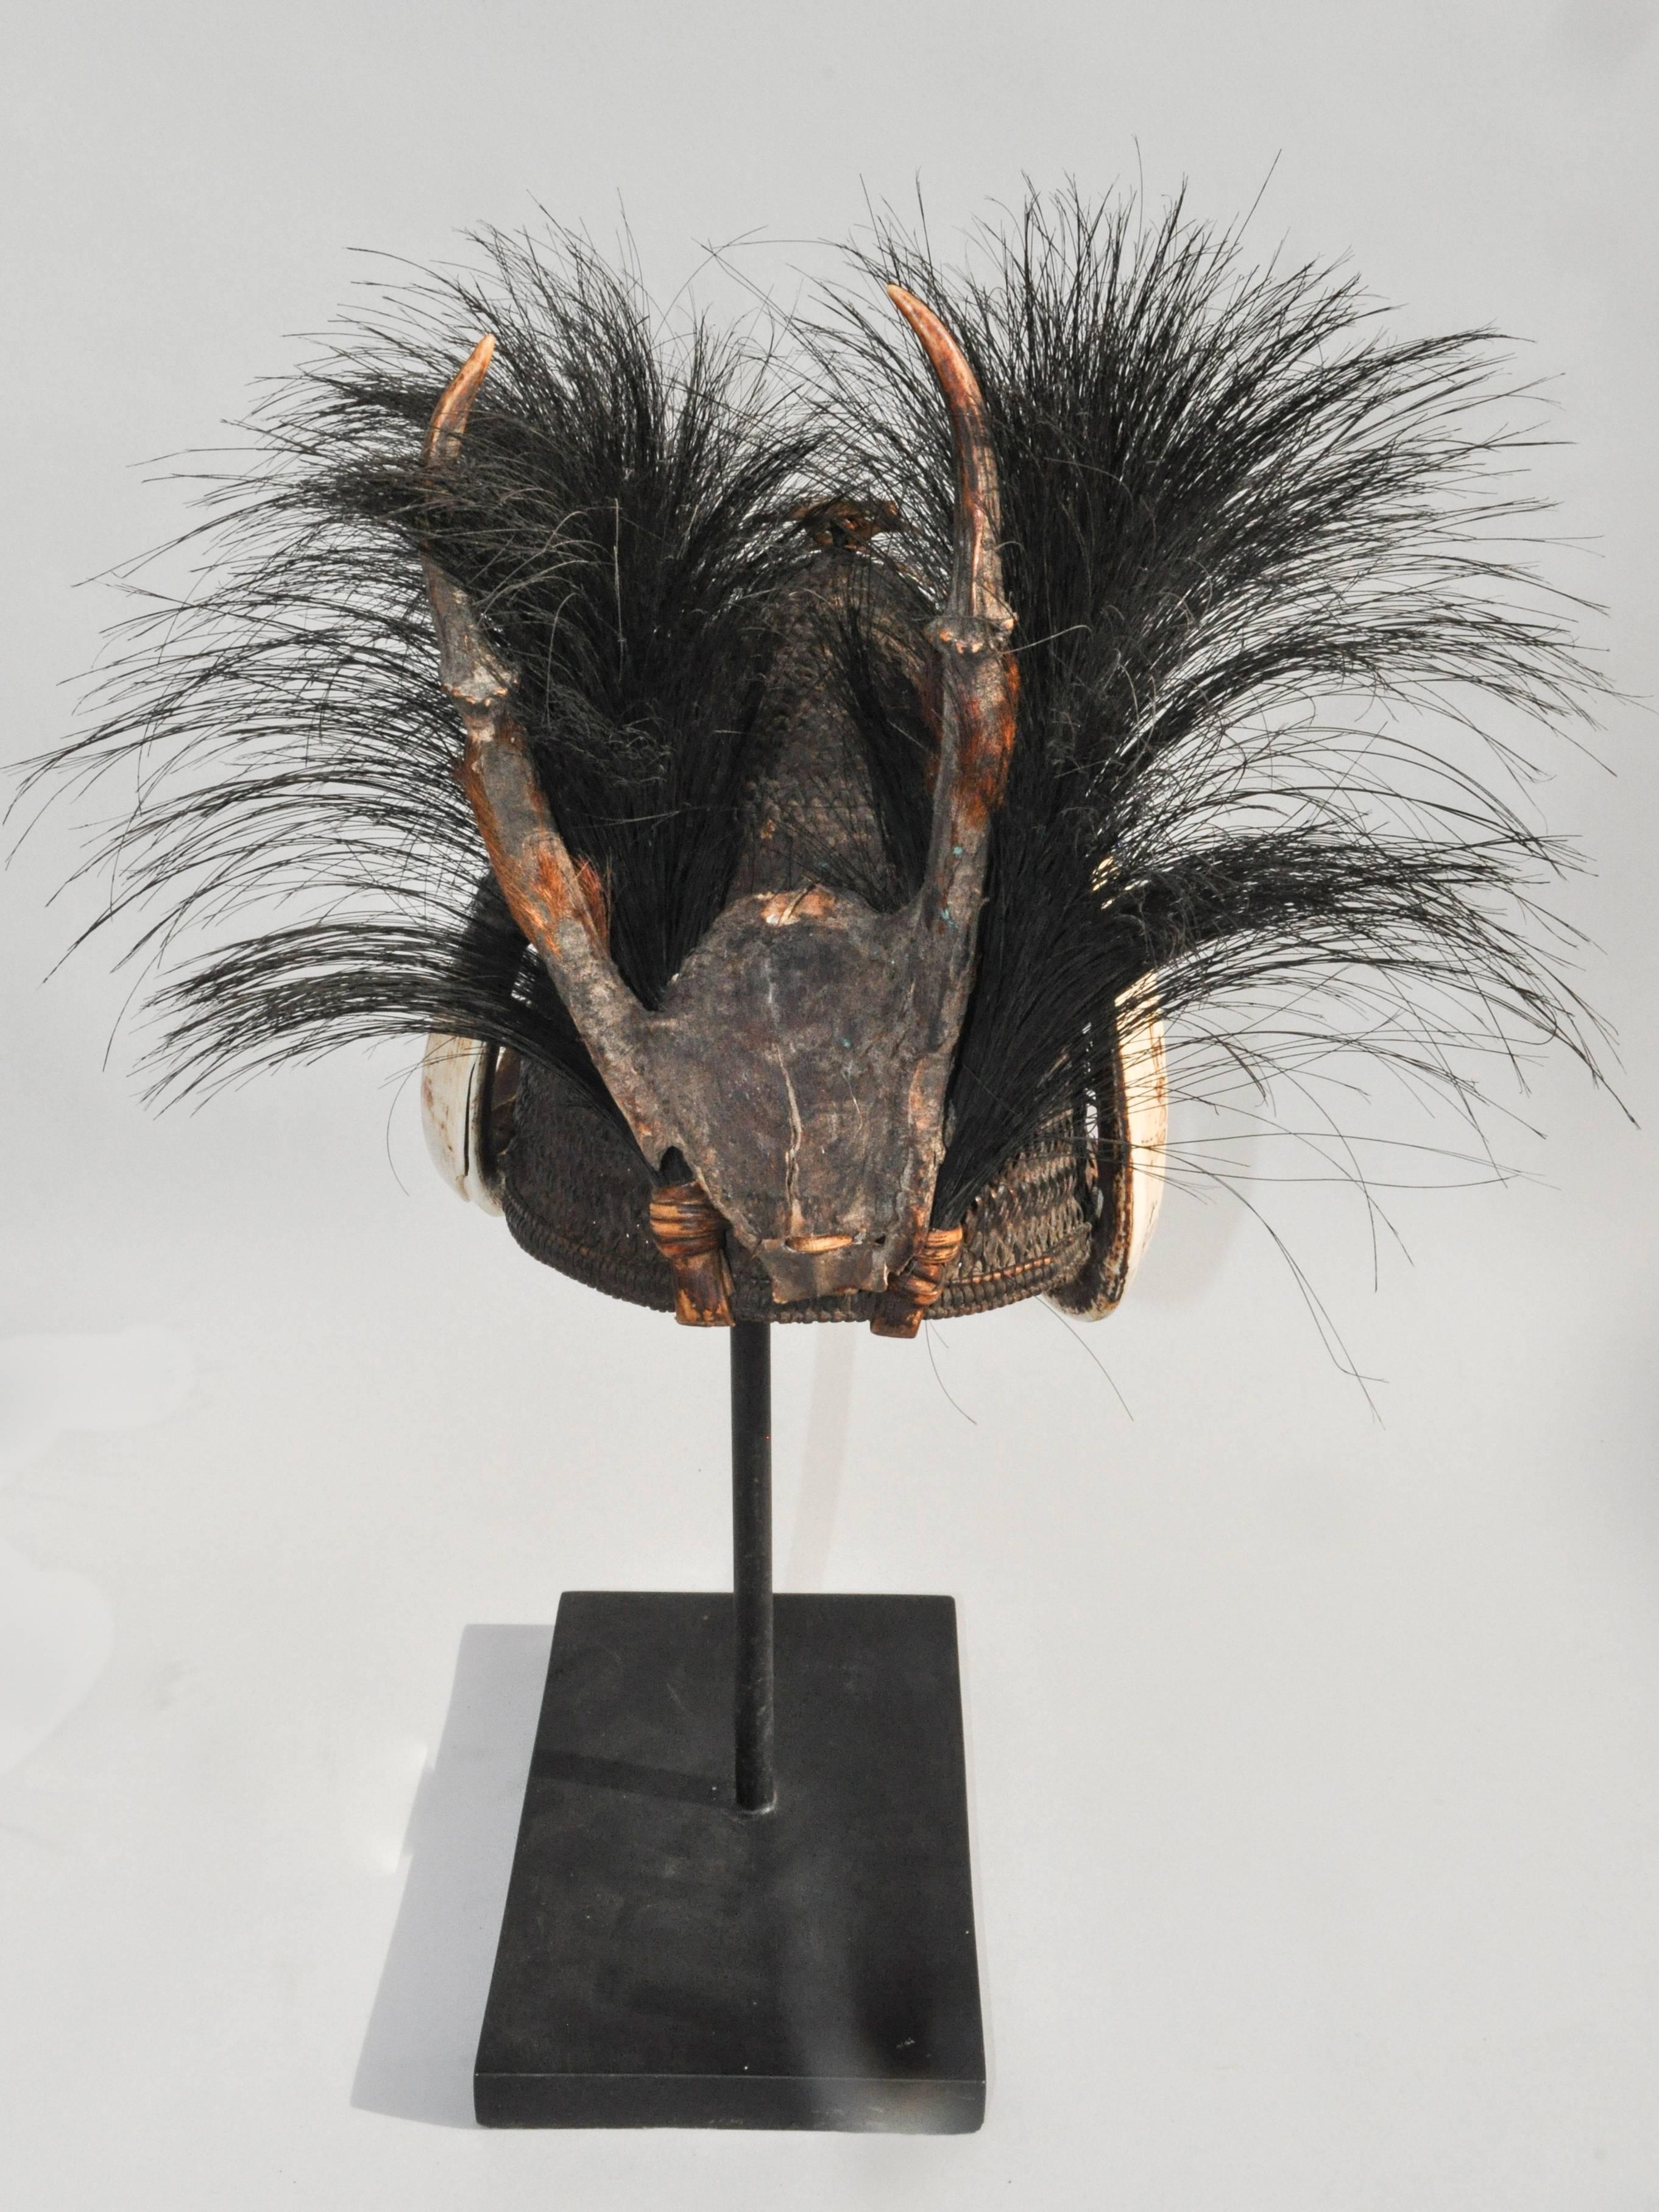 Rattan hat with boar tusk goat hair & Antler. Konyak Naga. Mid-20th Century. Mounted on a stand.
Offered by Bruce Hughes.
This is a ceremonial warriors hat from Nagaland, attributed to the Konyak Naga, but it may have come from any of a diverse